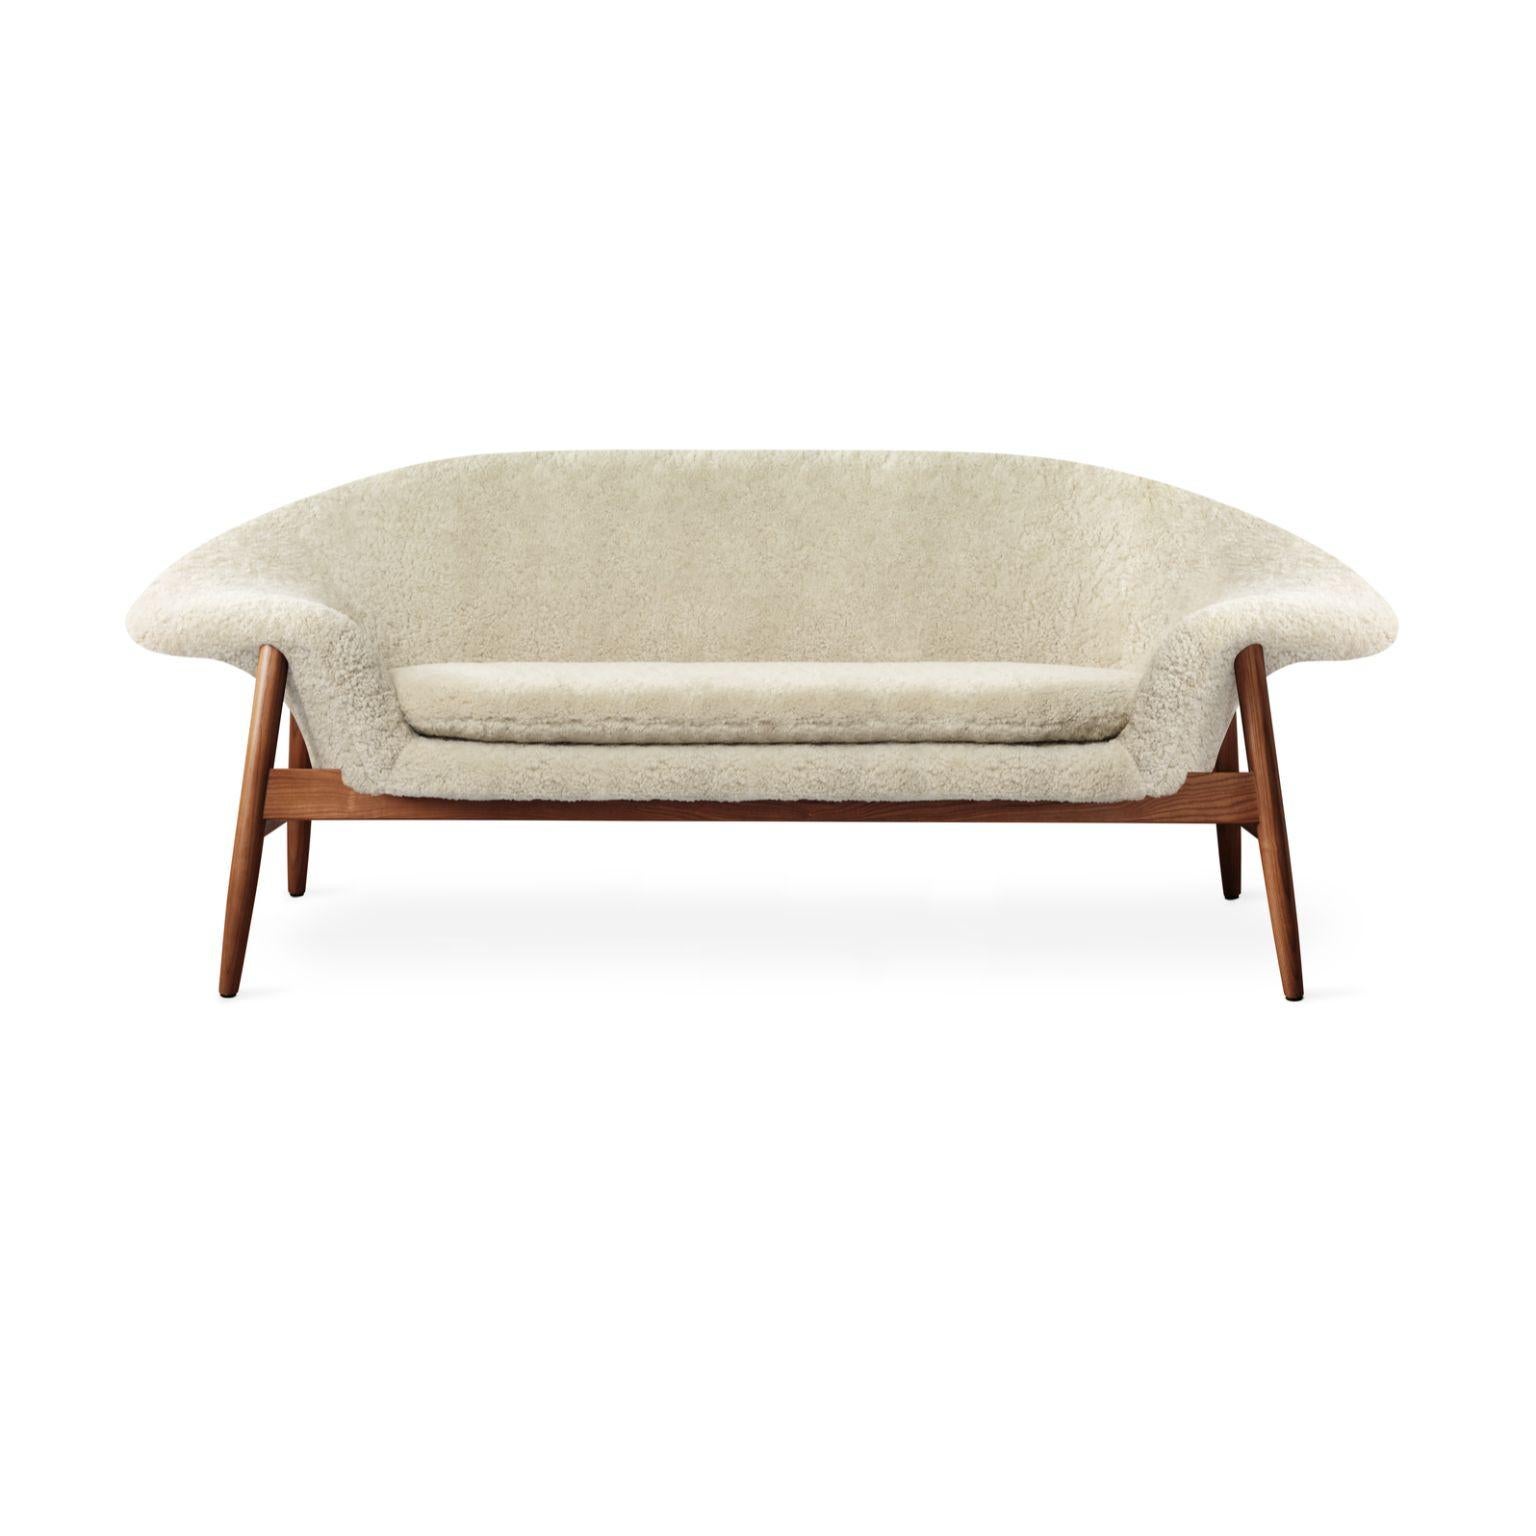 Fried egg sofa sheepskin moonlight by Warm Nordic
Dimensions: D 186 x W 68 x H 68 cm
Material: Sheepskin upholstery, Solid oiled teak
Weight: 42 kg
Also available in different colours and finishes.

Warm Nordic is an ambitious design brand